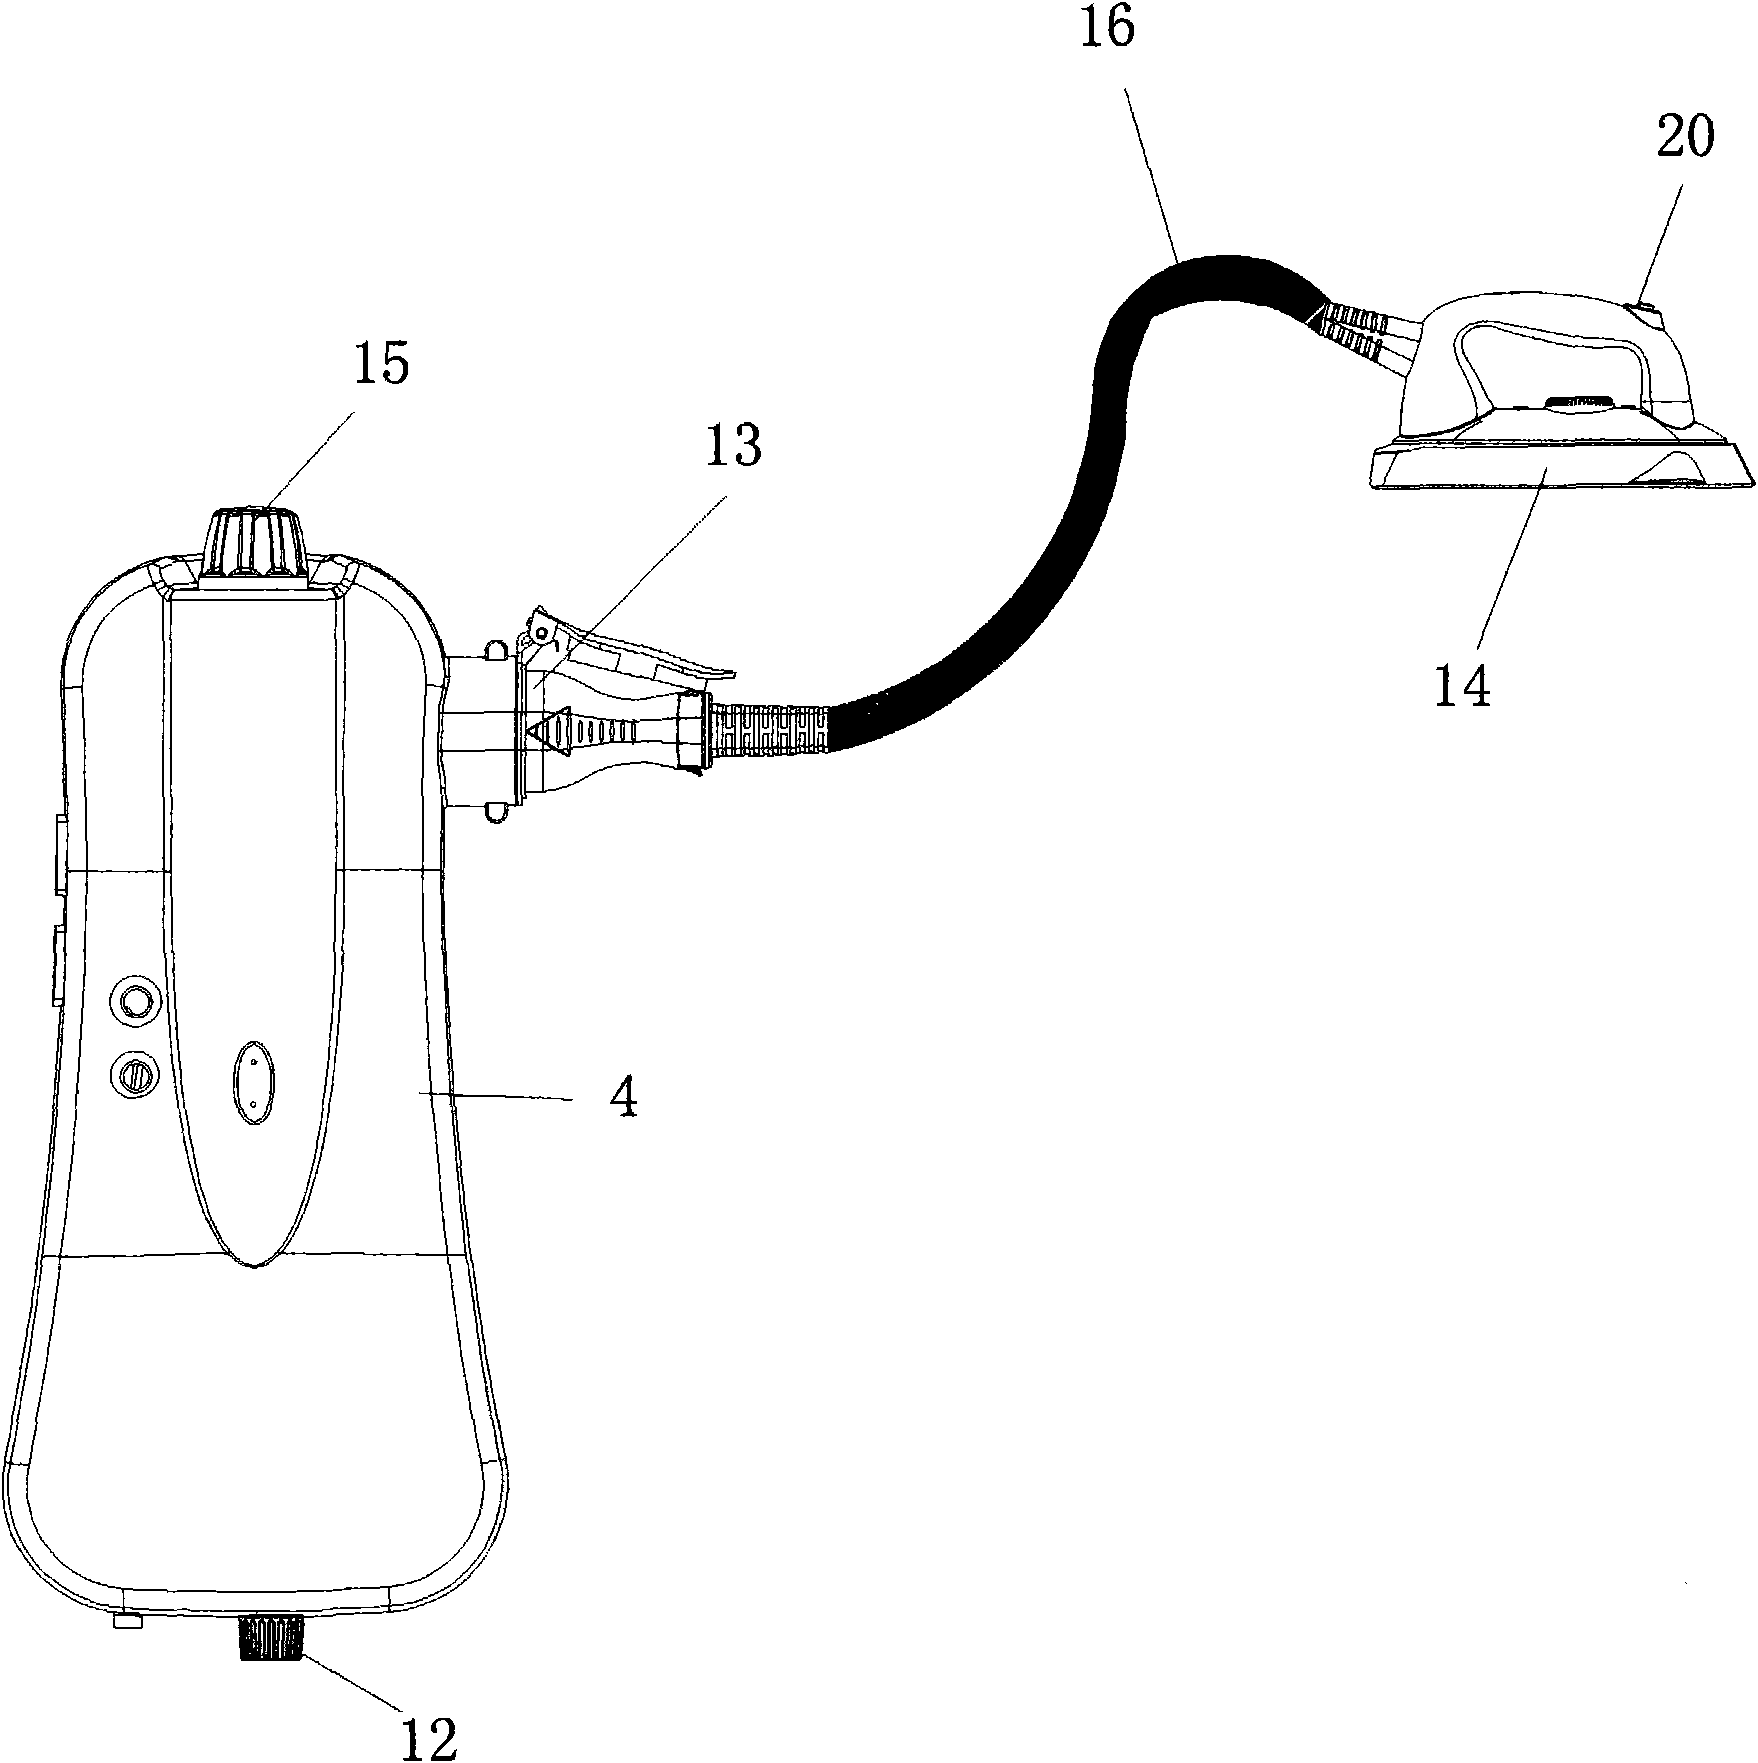 Steam ironing device assembly